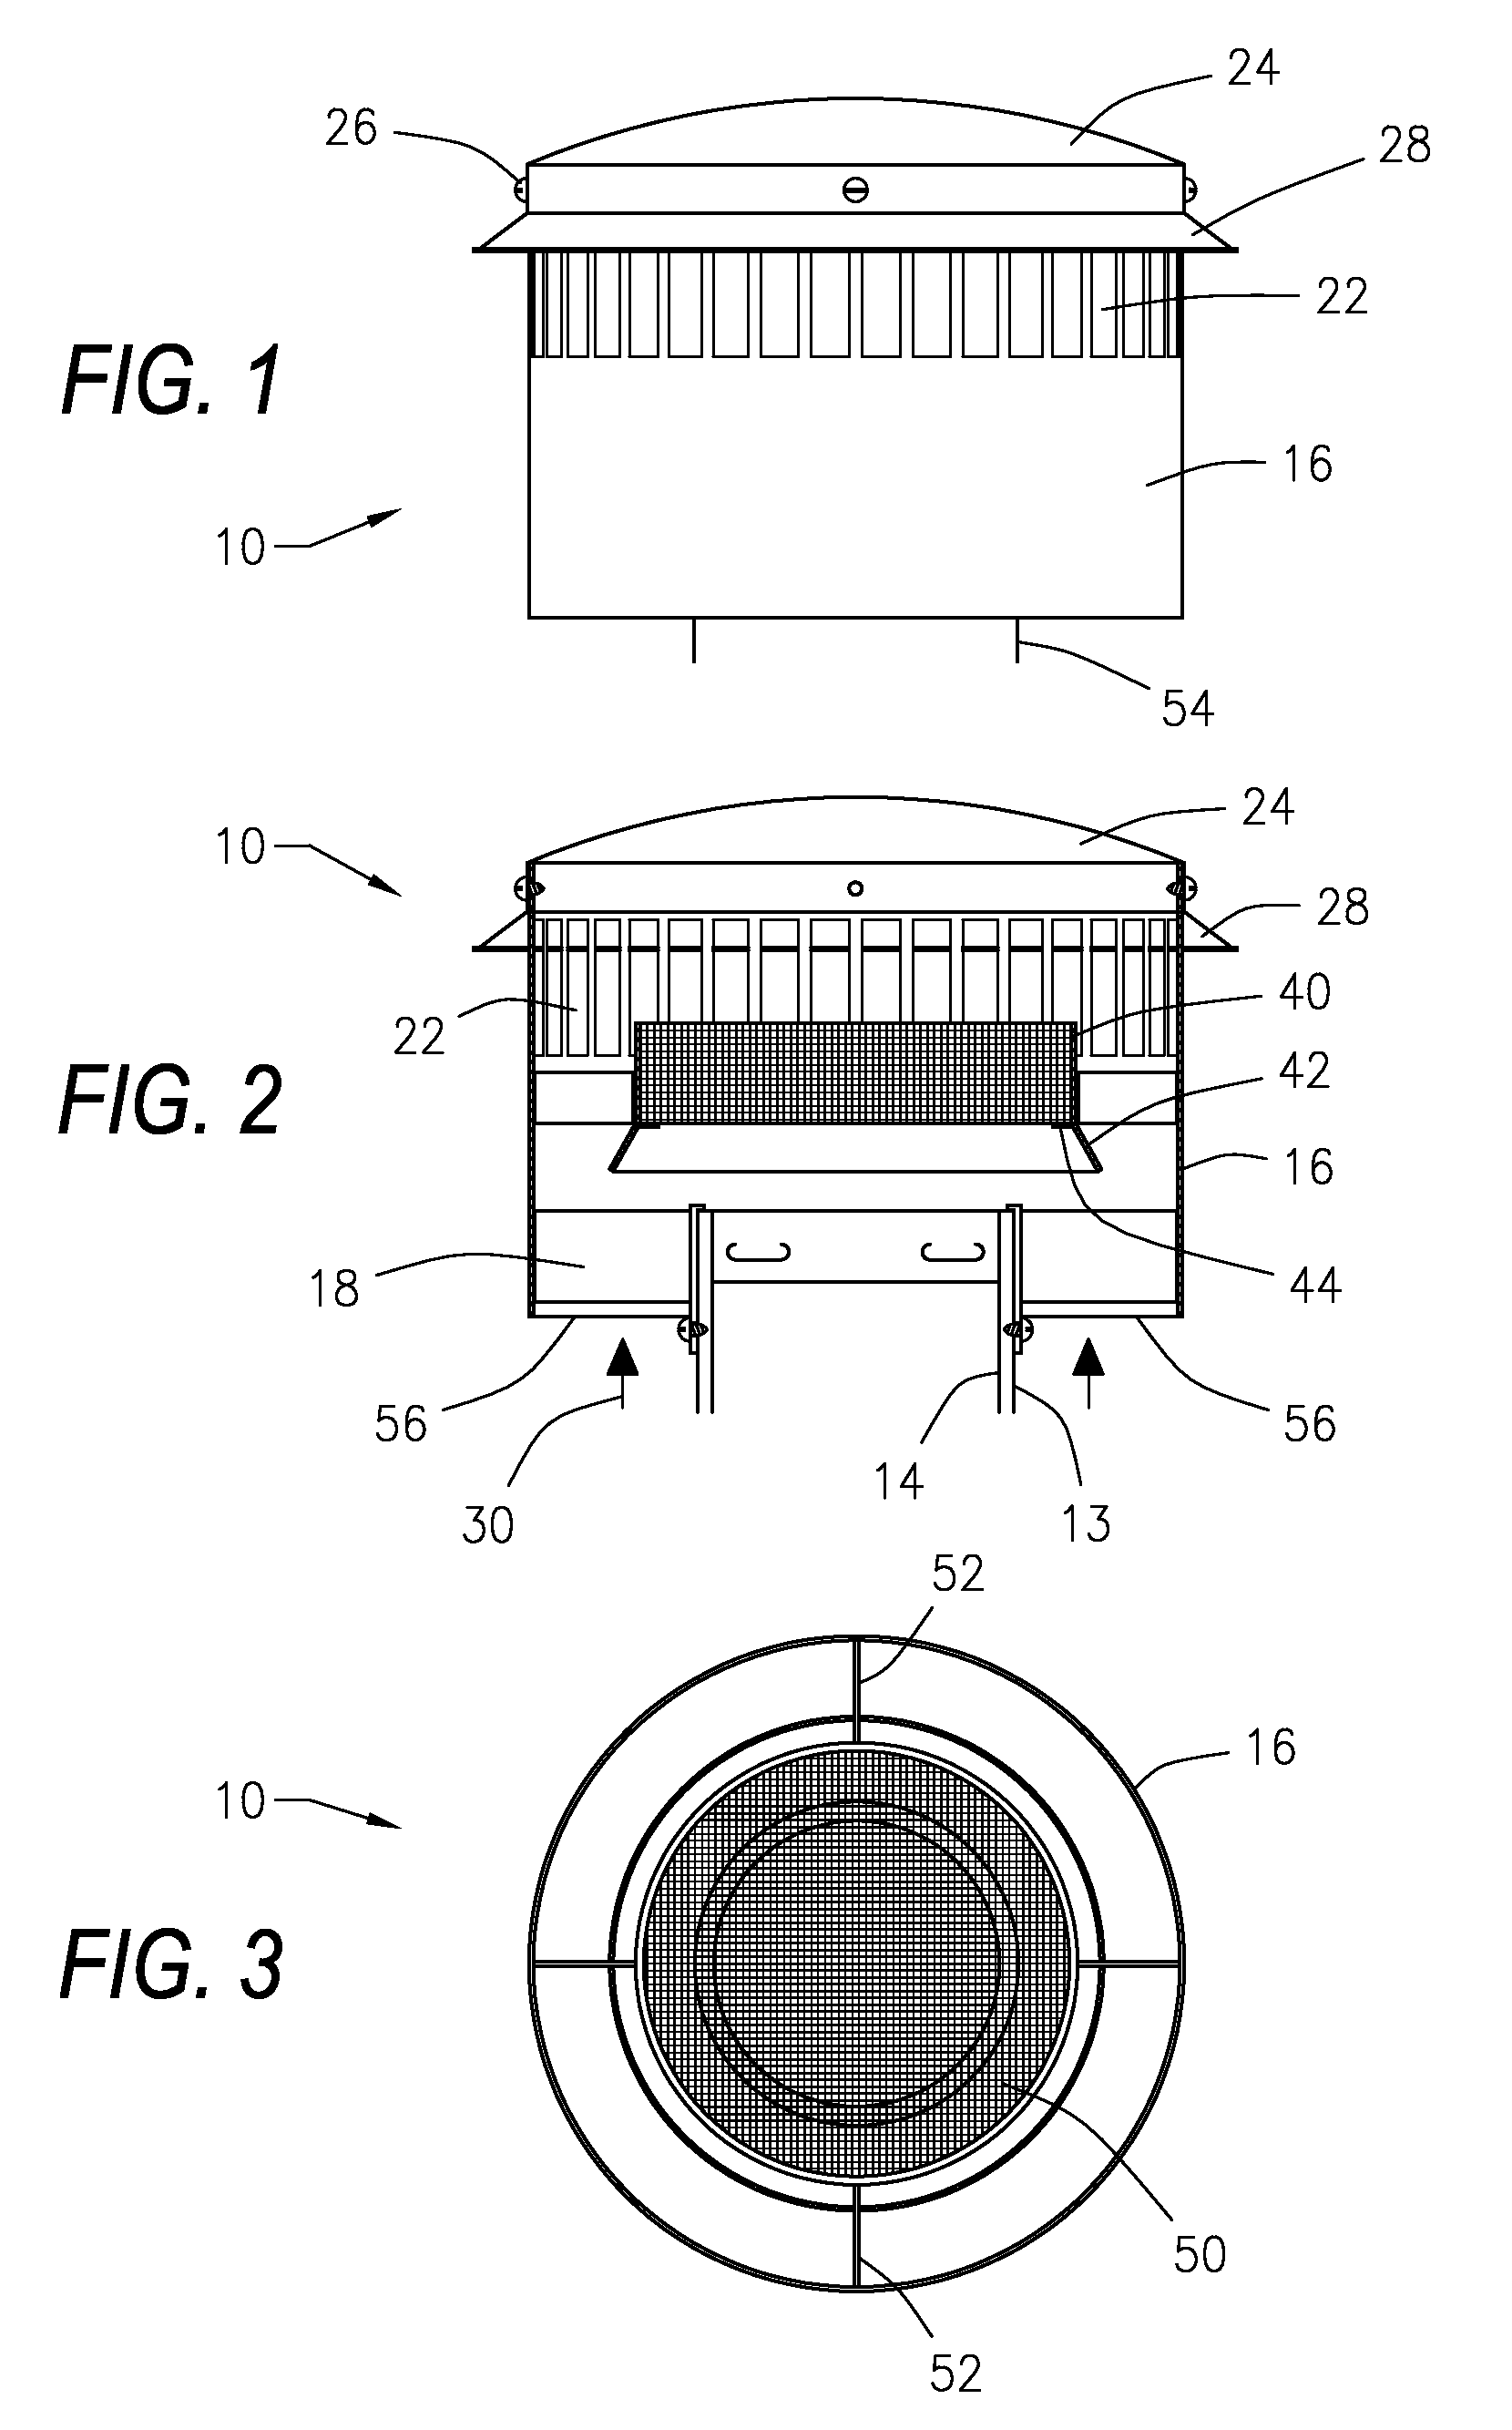 Exhaust flue cap and filter device for a gas fired appliance